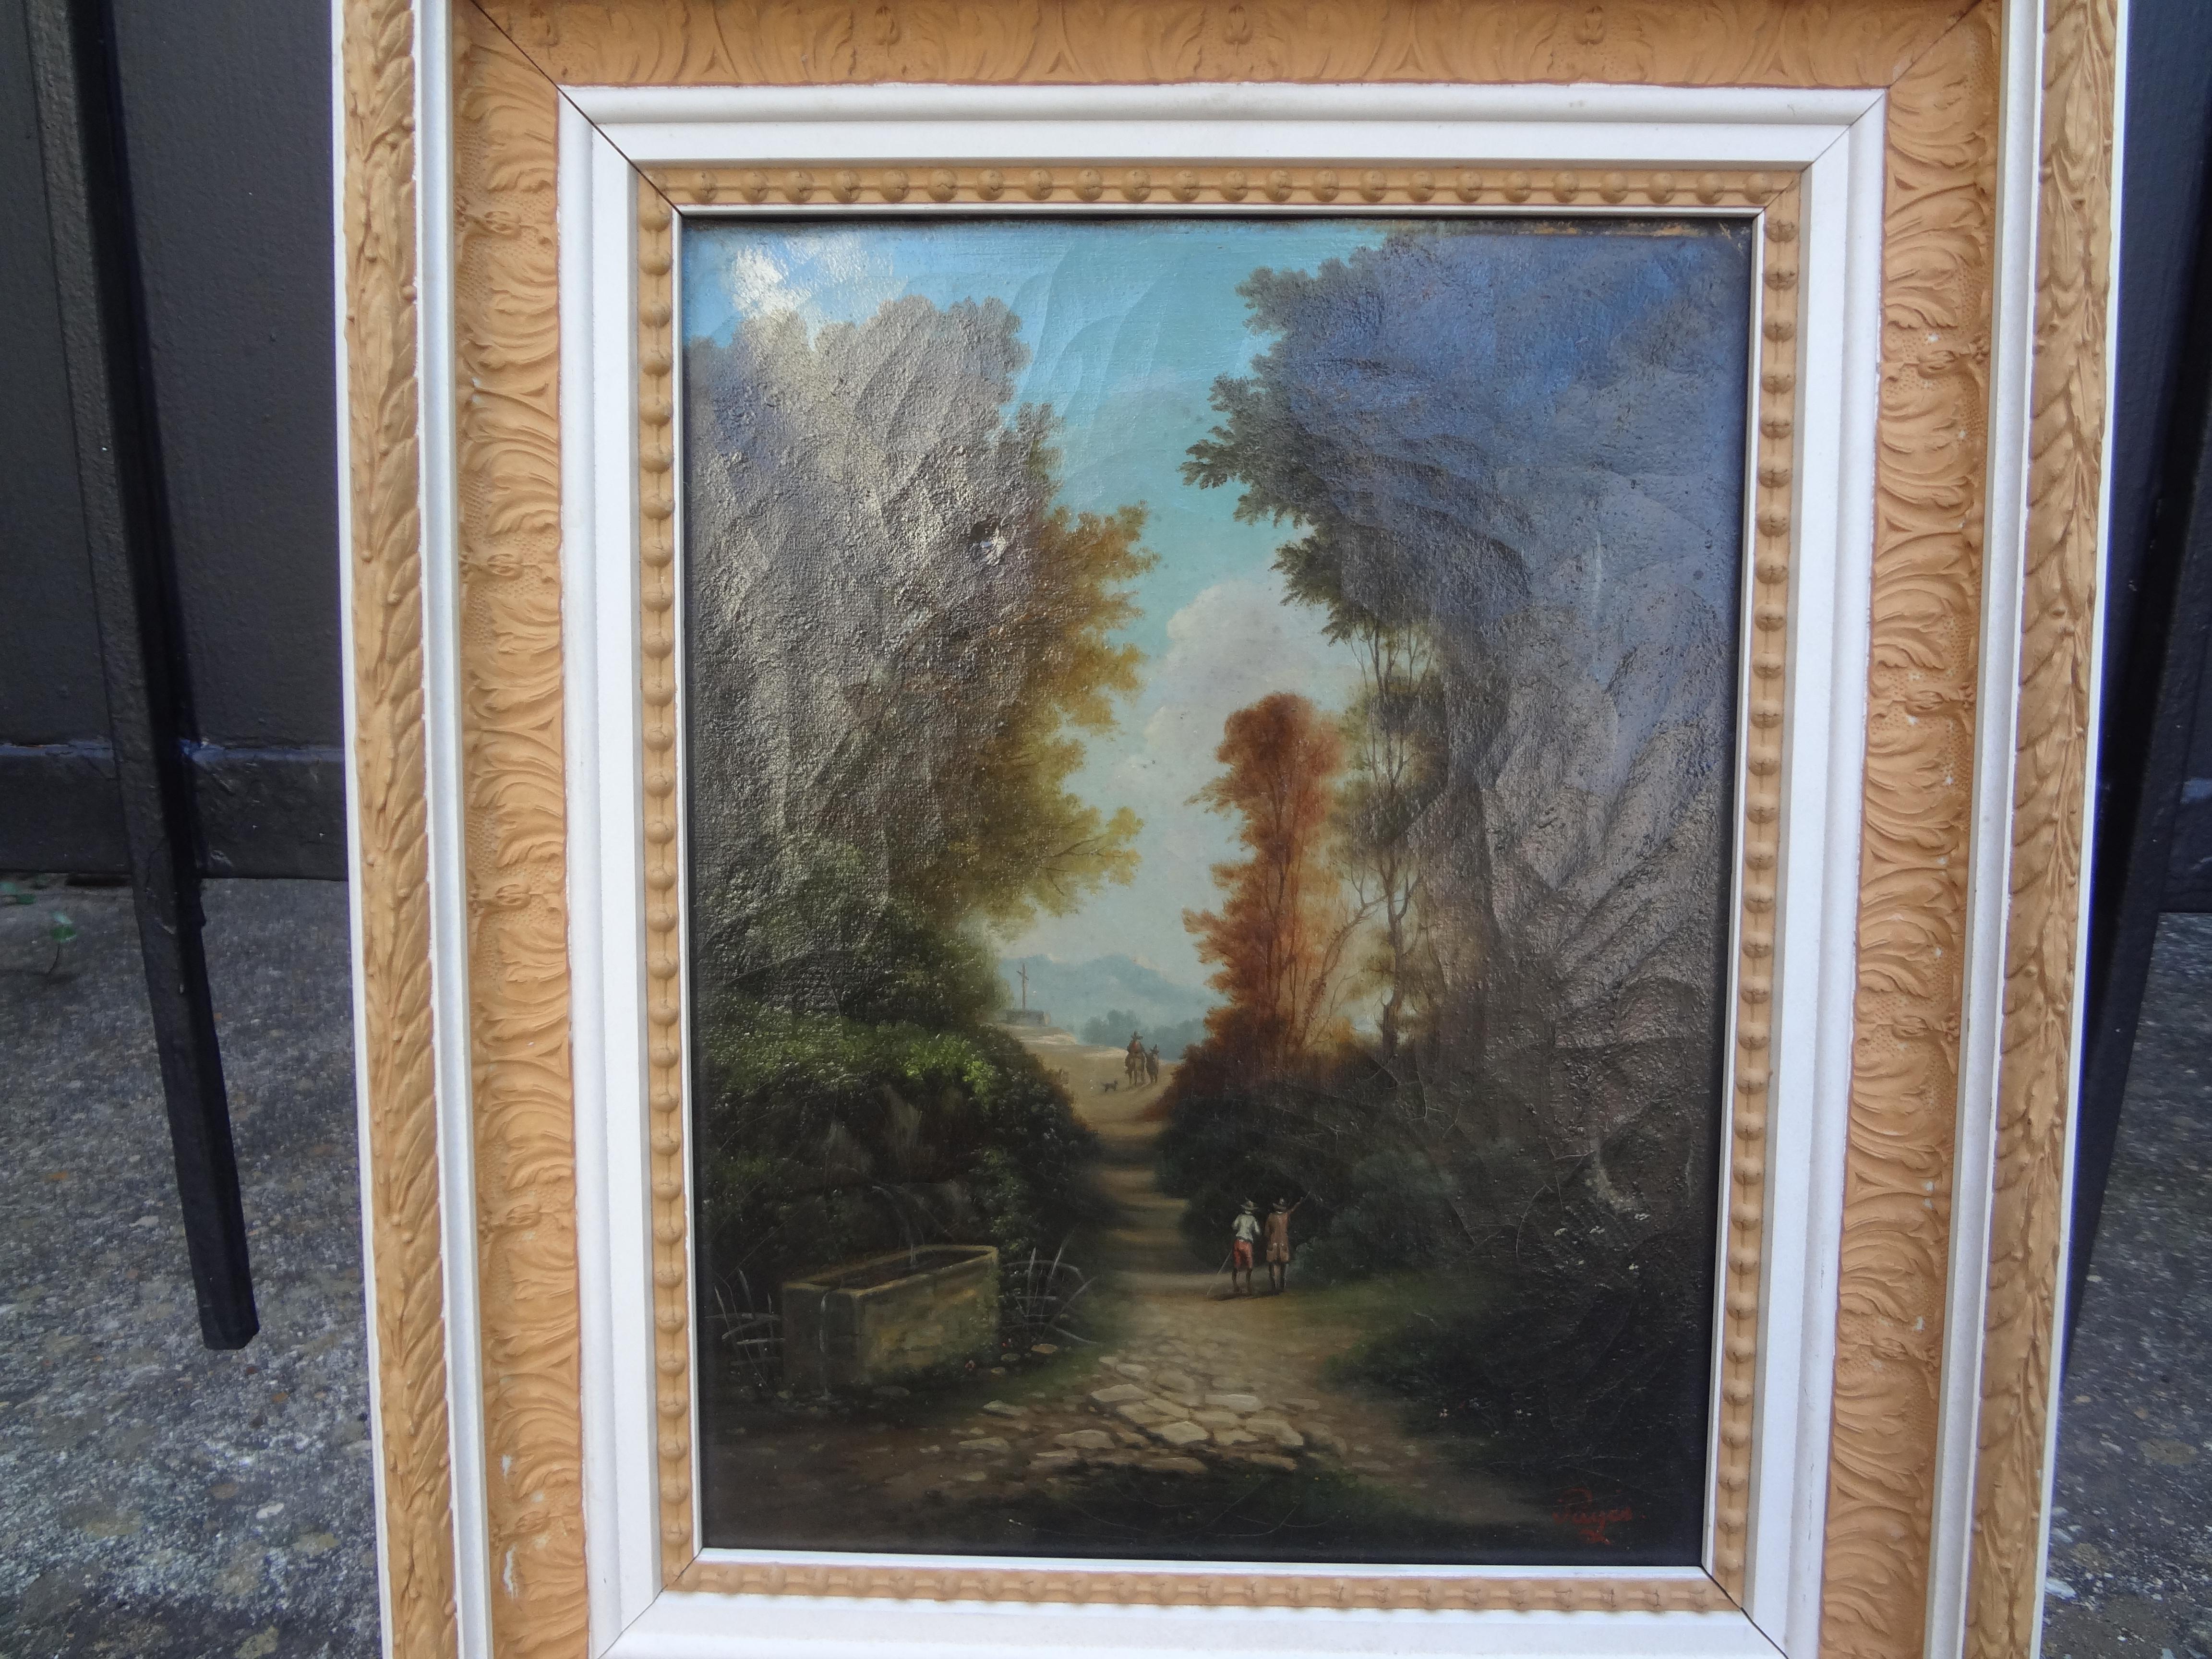 19th Century French Landscape Oil On Canvas Signed Pages.
Here is a fine example of the work of Jules Eugene Pages. 
Dimensions of canvas only:
13.75 inches H
10.75 inches W

Jules Eugene Pages (1867-1946), sometimes Jules Eugène Pagès, was an